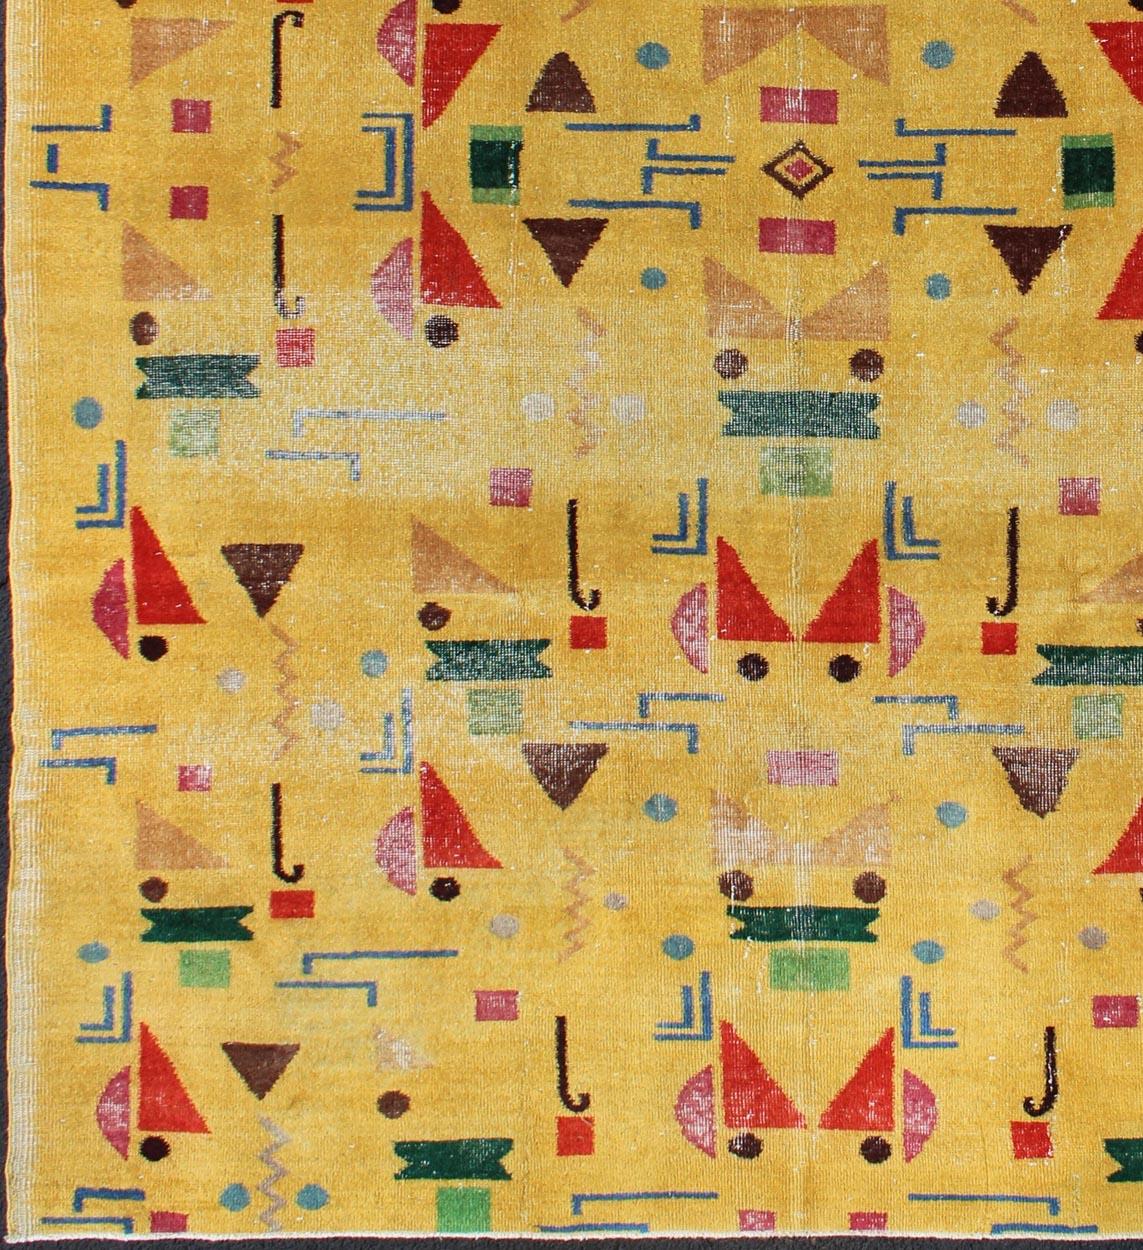 This finely composed Mid-Century Modern rug features a symmetric geometric design with various shapes, composed in vivid shades of yellow, red, green, blue and brown, rendering this rug a great option for modern interiors.
Mid-Century Modern